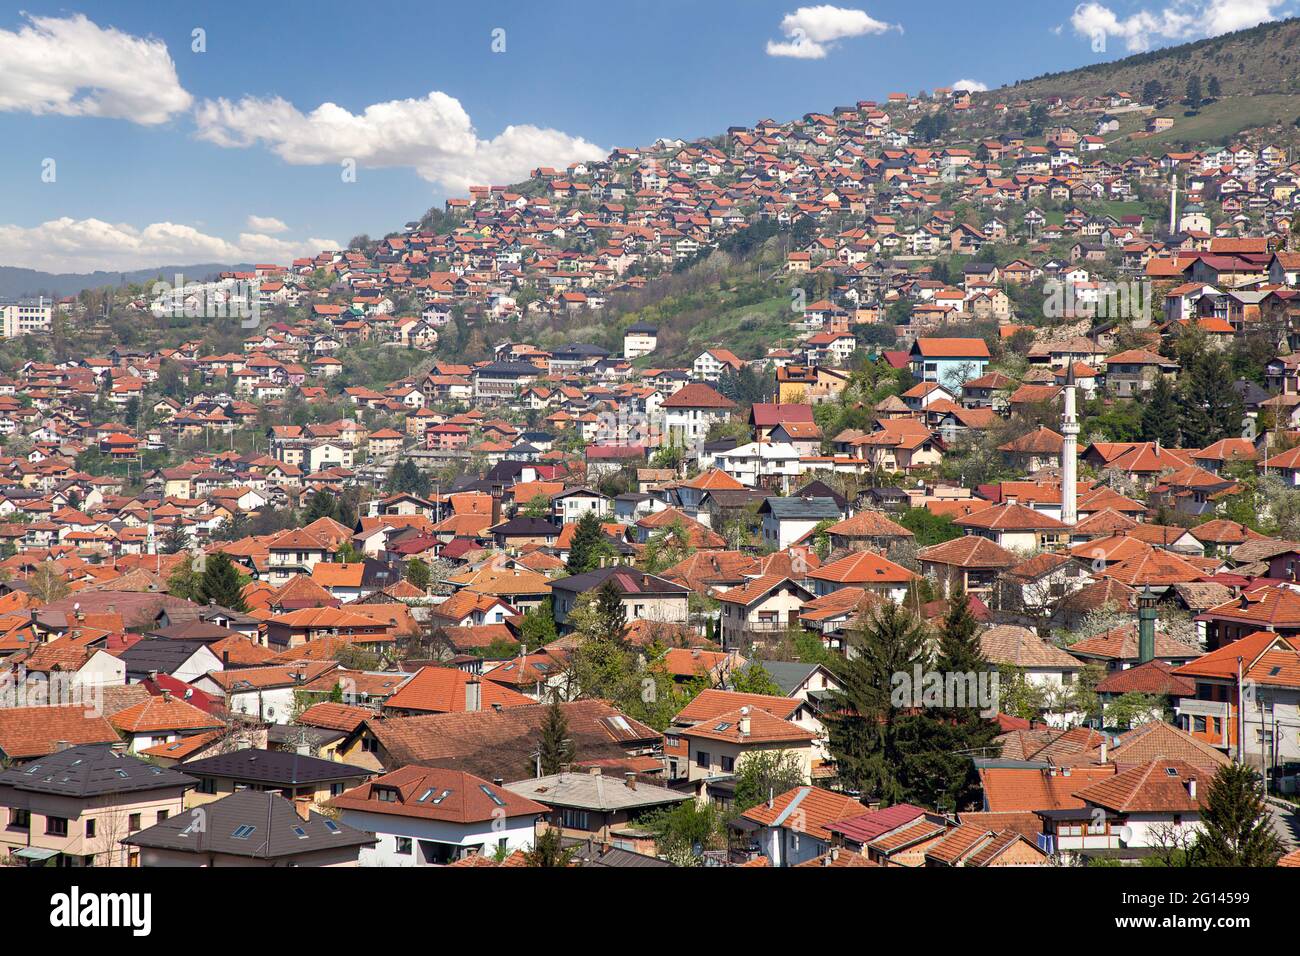 View over the houses in the mountains of Sarajevo, Bosnia and Herzegovina. Stock Photo